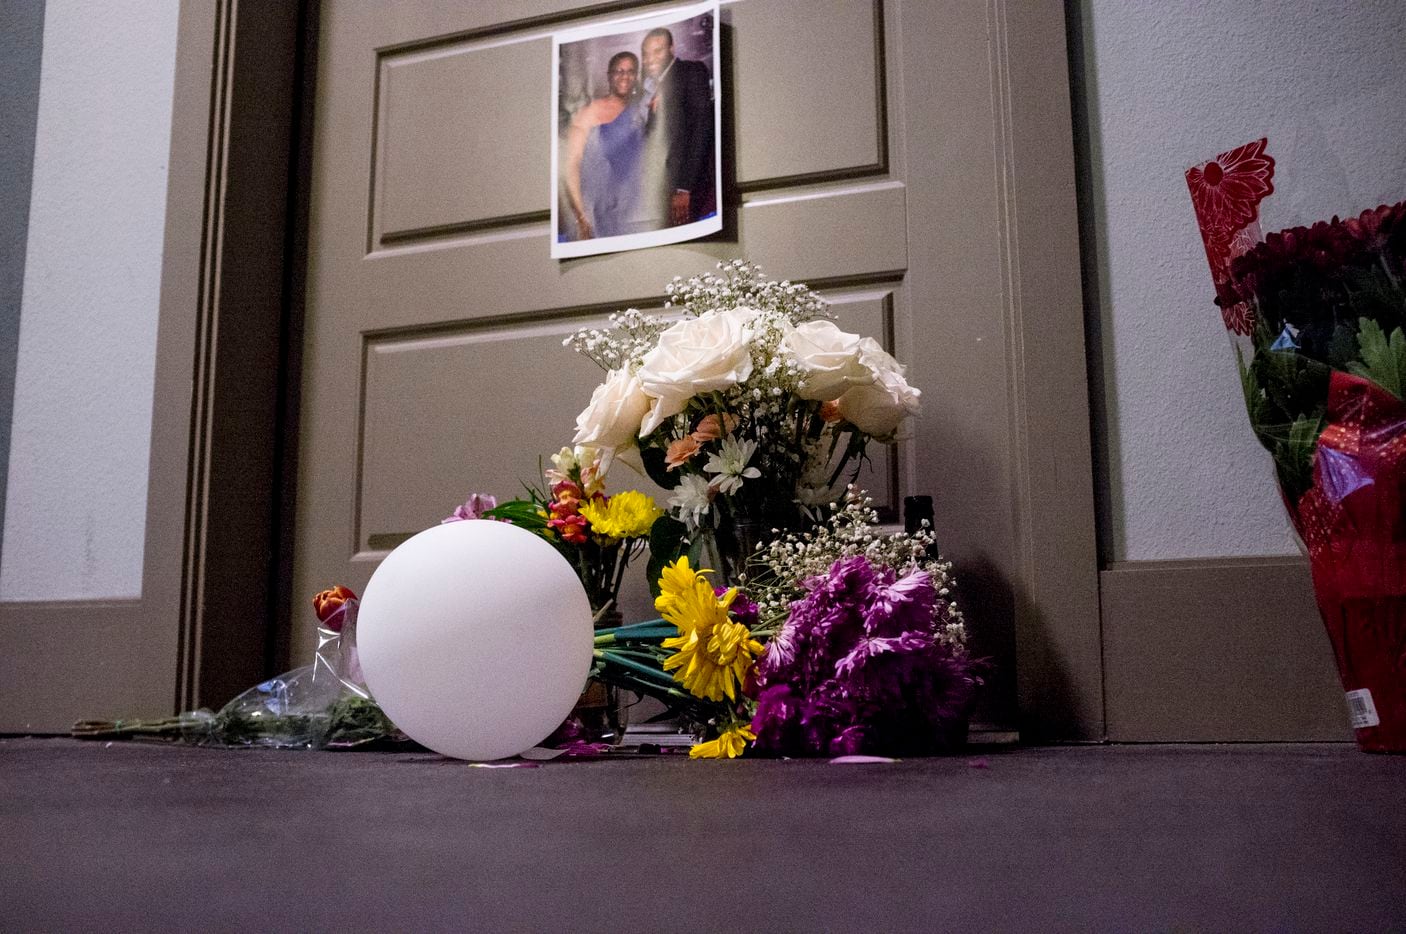 Flowers are placed at the front door apartment of Botham Jean on Monday, Sept. 10, 2018 in Dallas. Jean was shot Thursday by off-duty Dallas police officer Amber Guyger, who says she mistook his apartment for hers.